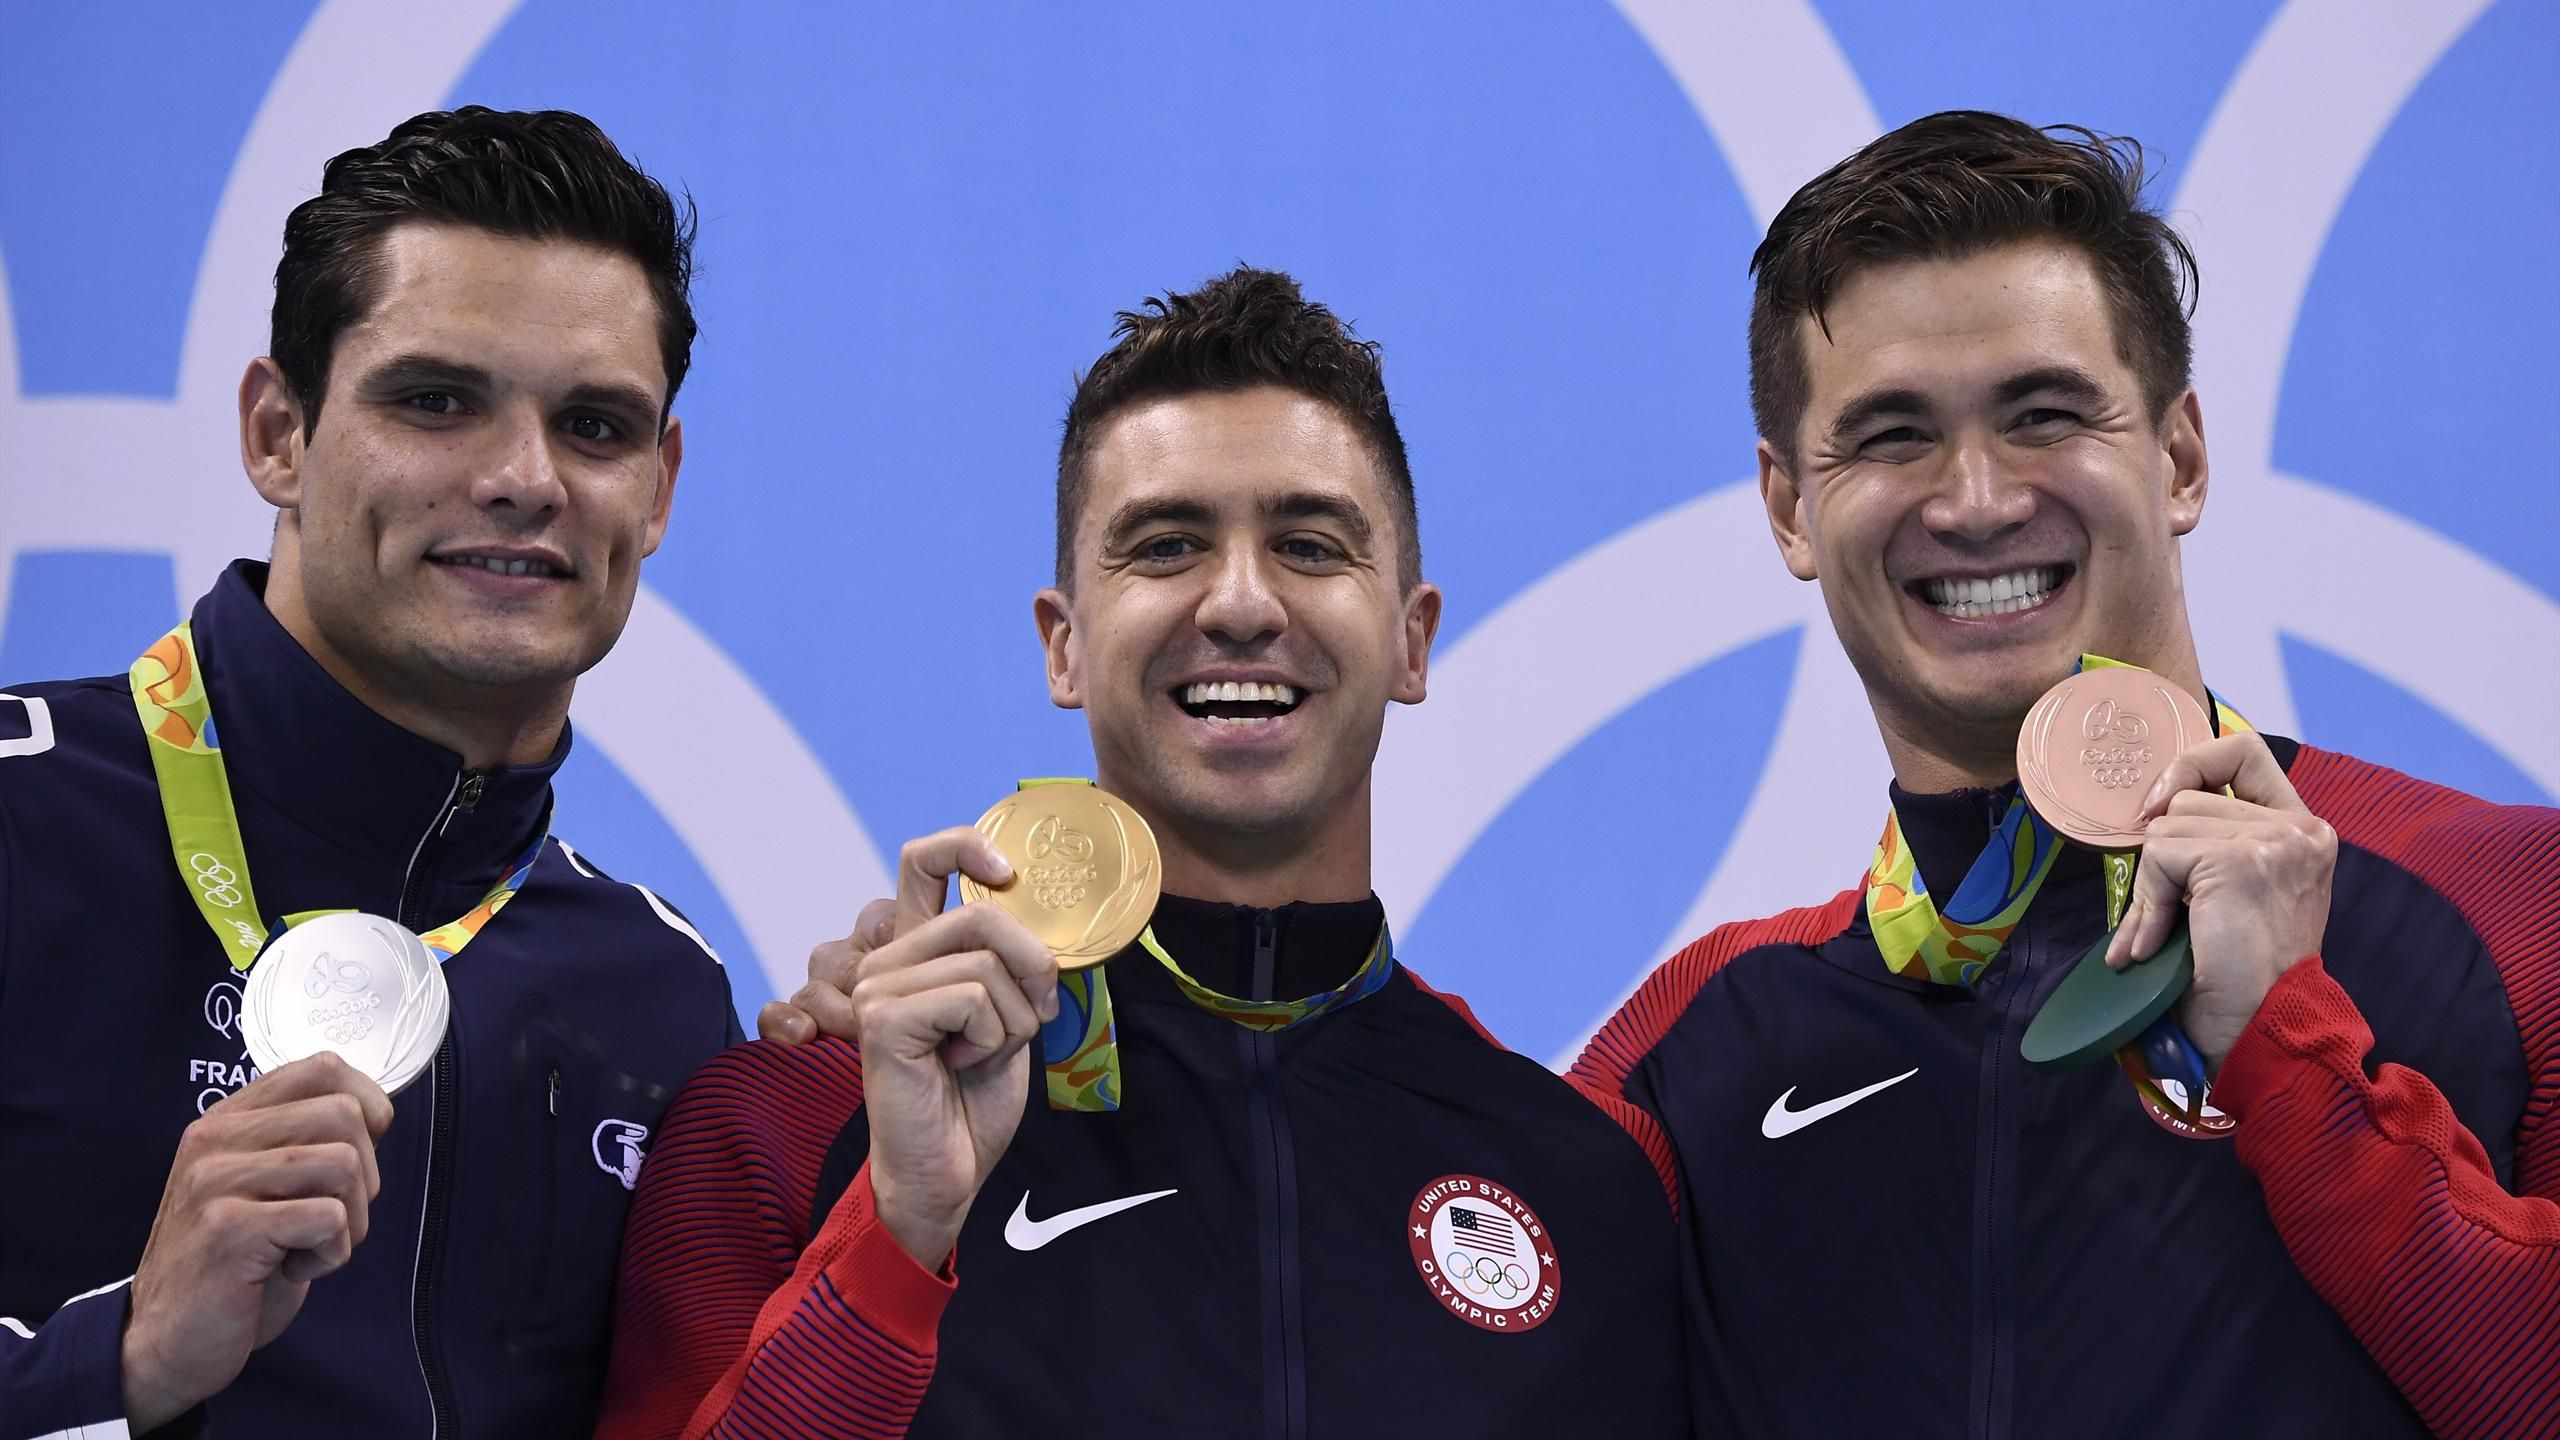 Anthony Ervin Wins Gold 16 Years After His First Ben Proud Finishes Fourth Eurosport 